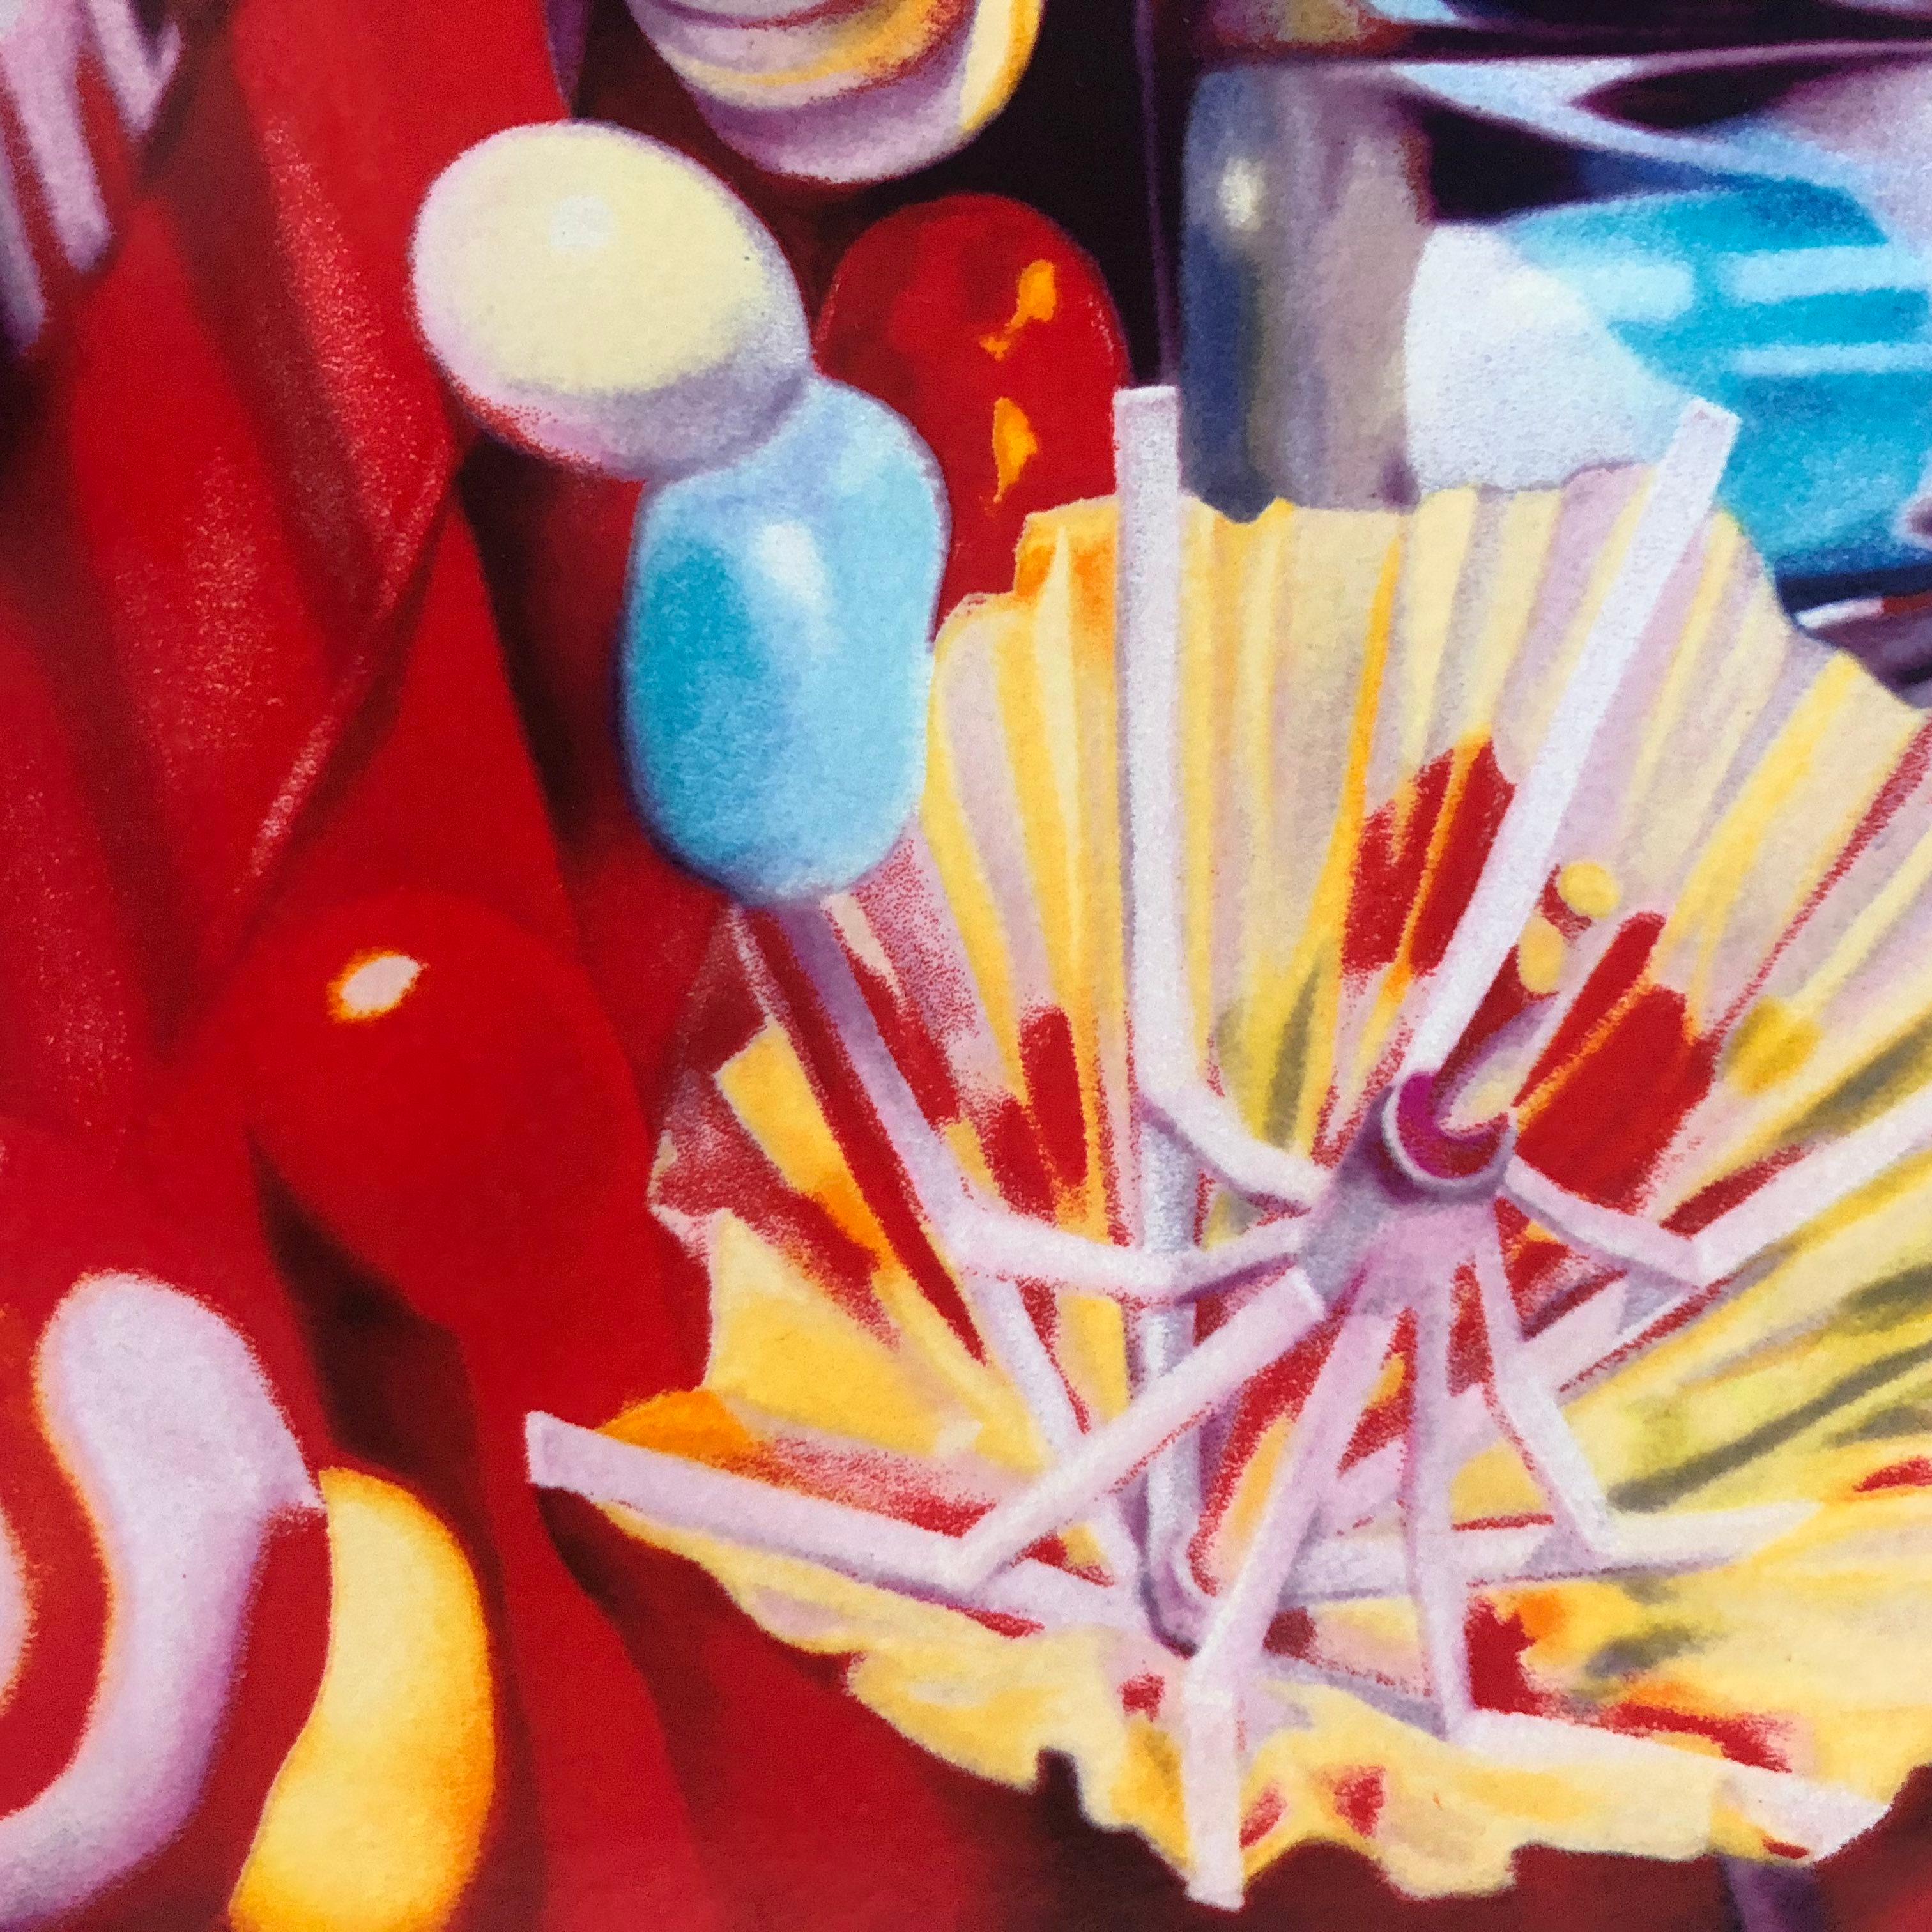 Coke, Jelly Beans and Lifesavers, Kate Brinkworth, Contemporary Print, Sweet Art For Sale 5